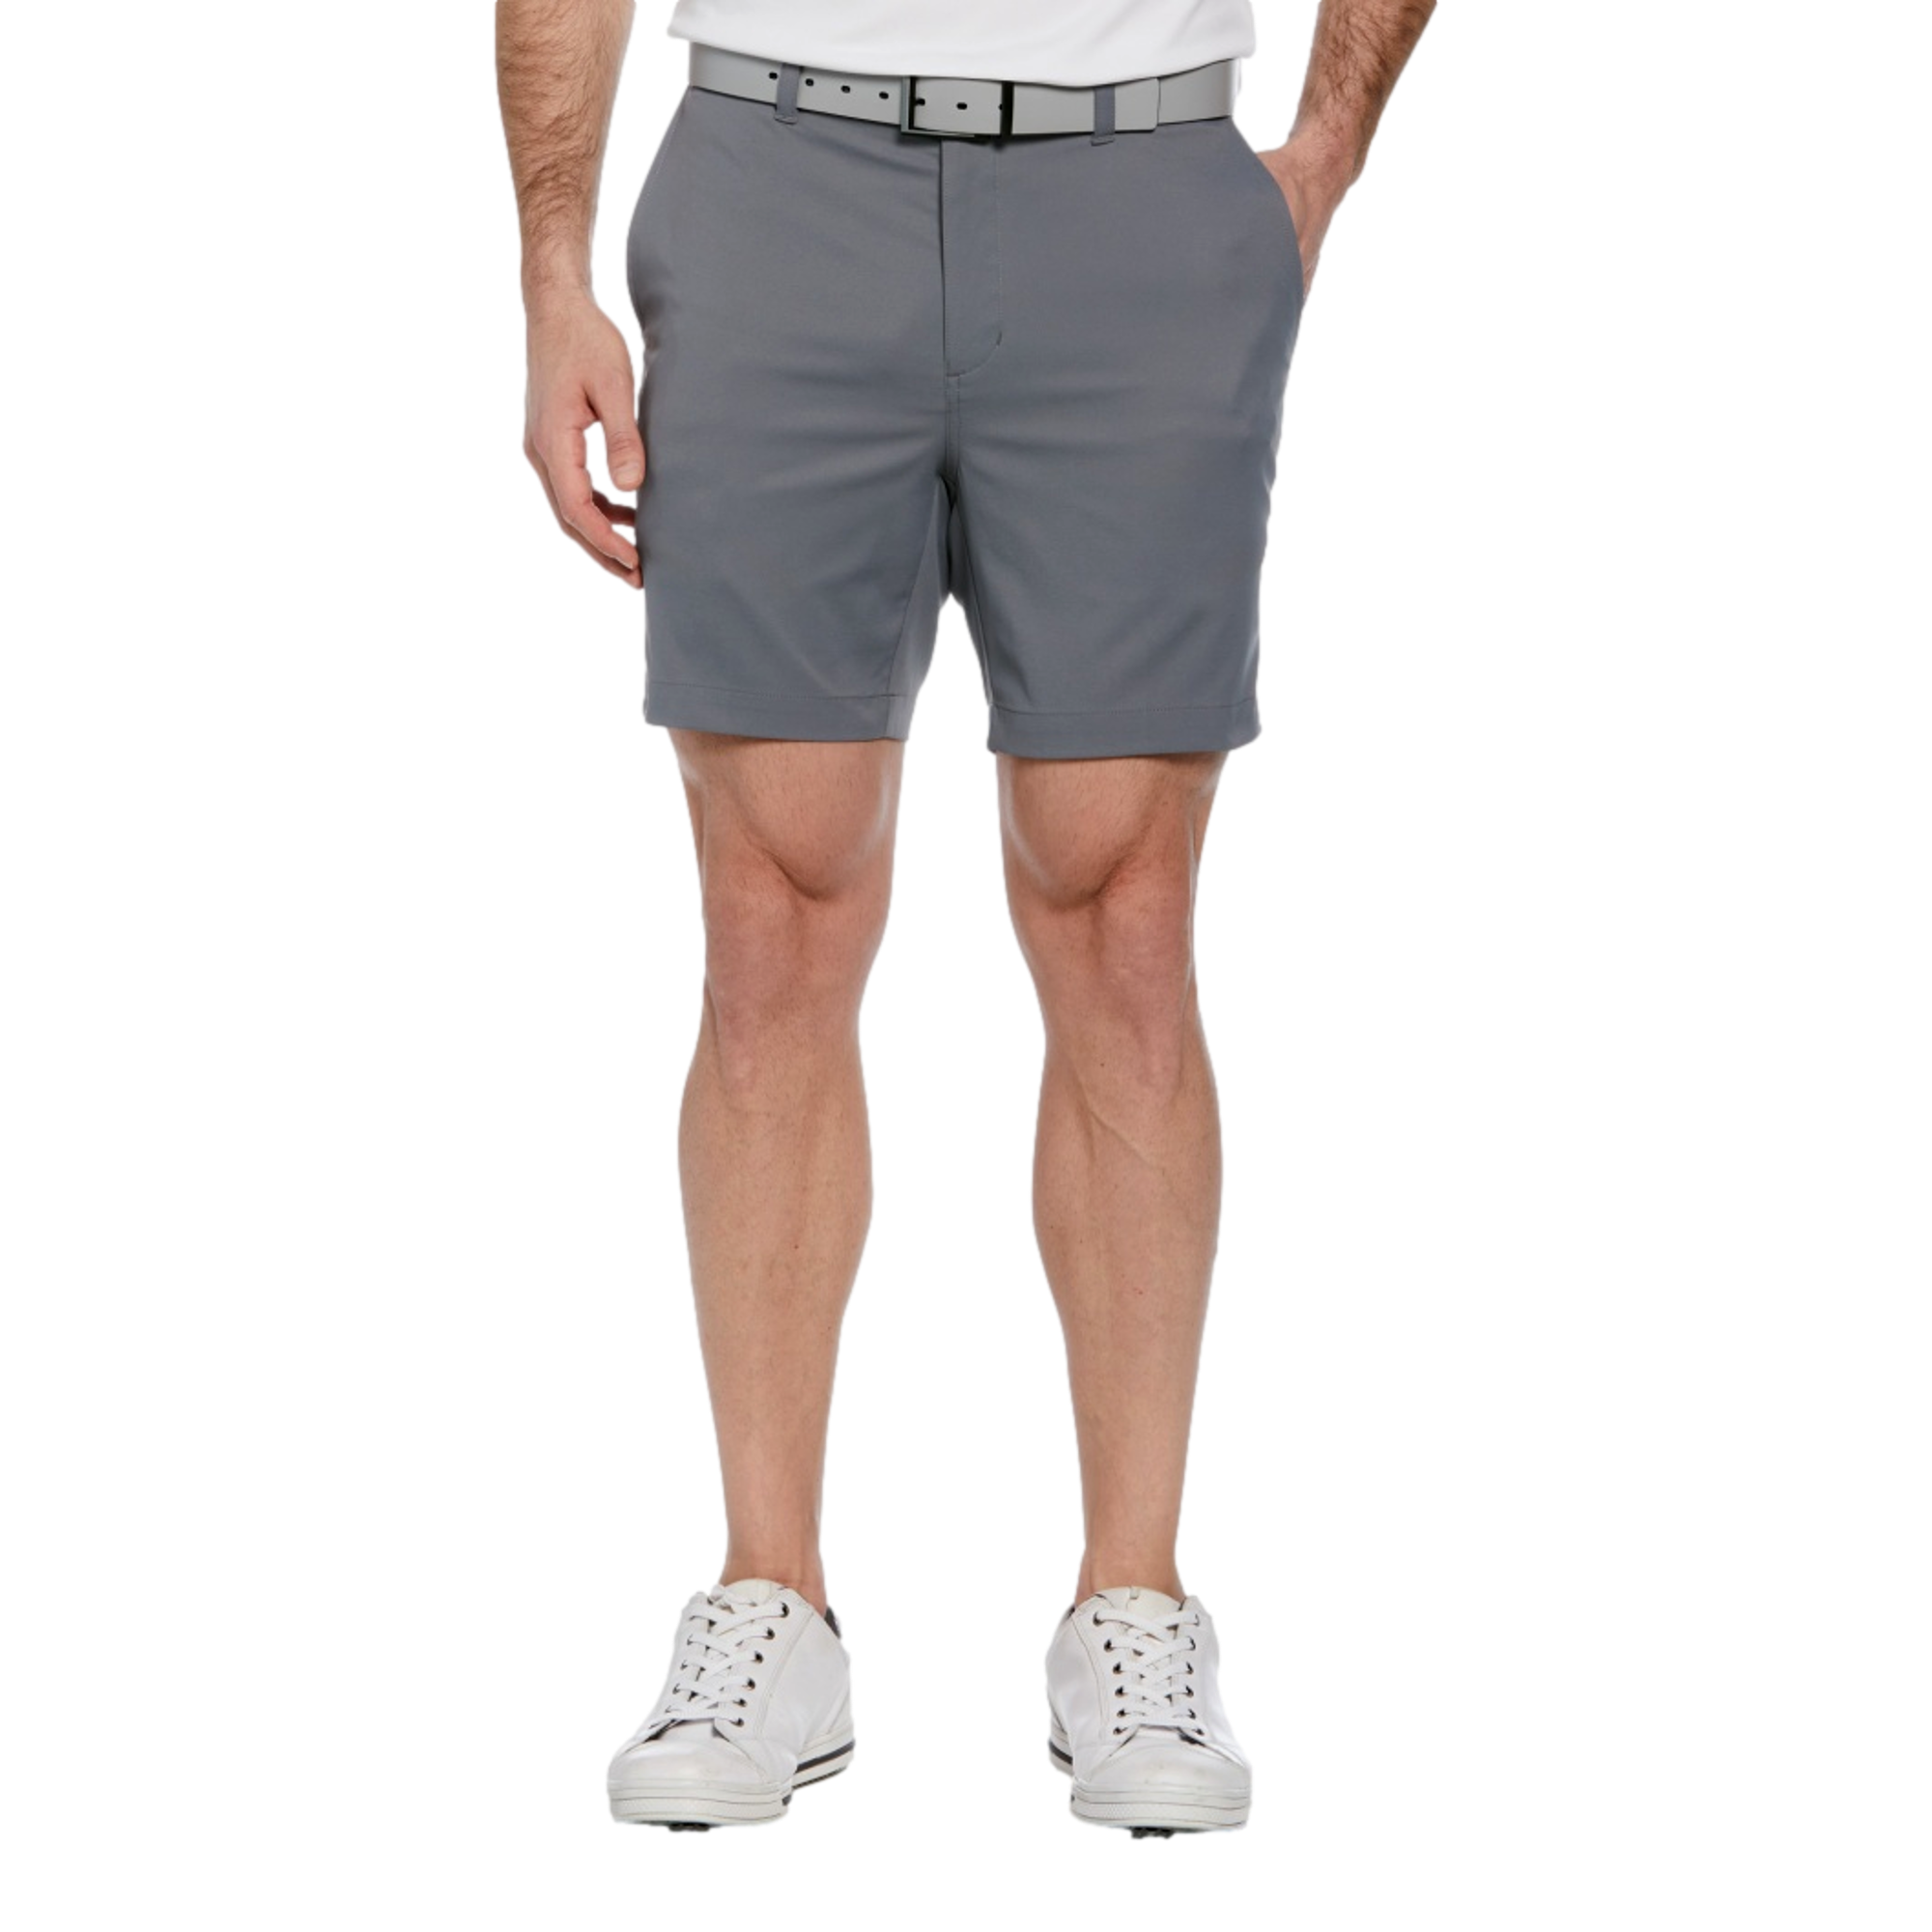 7" Golf Shorts with Active Waistband